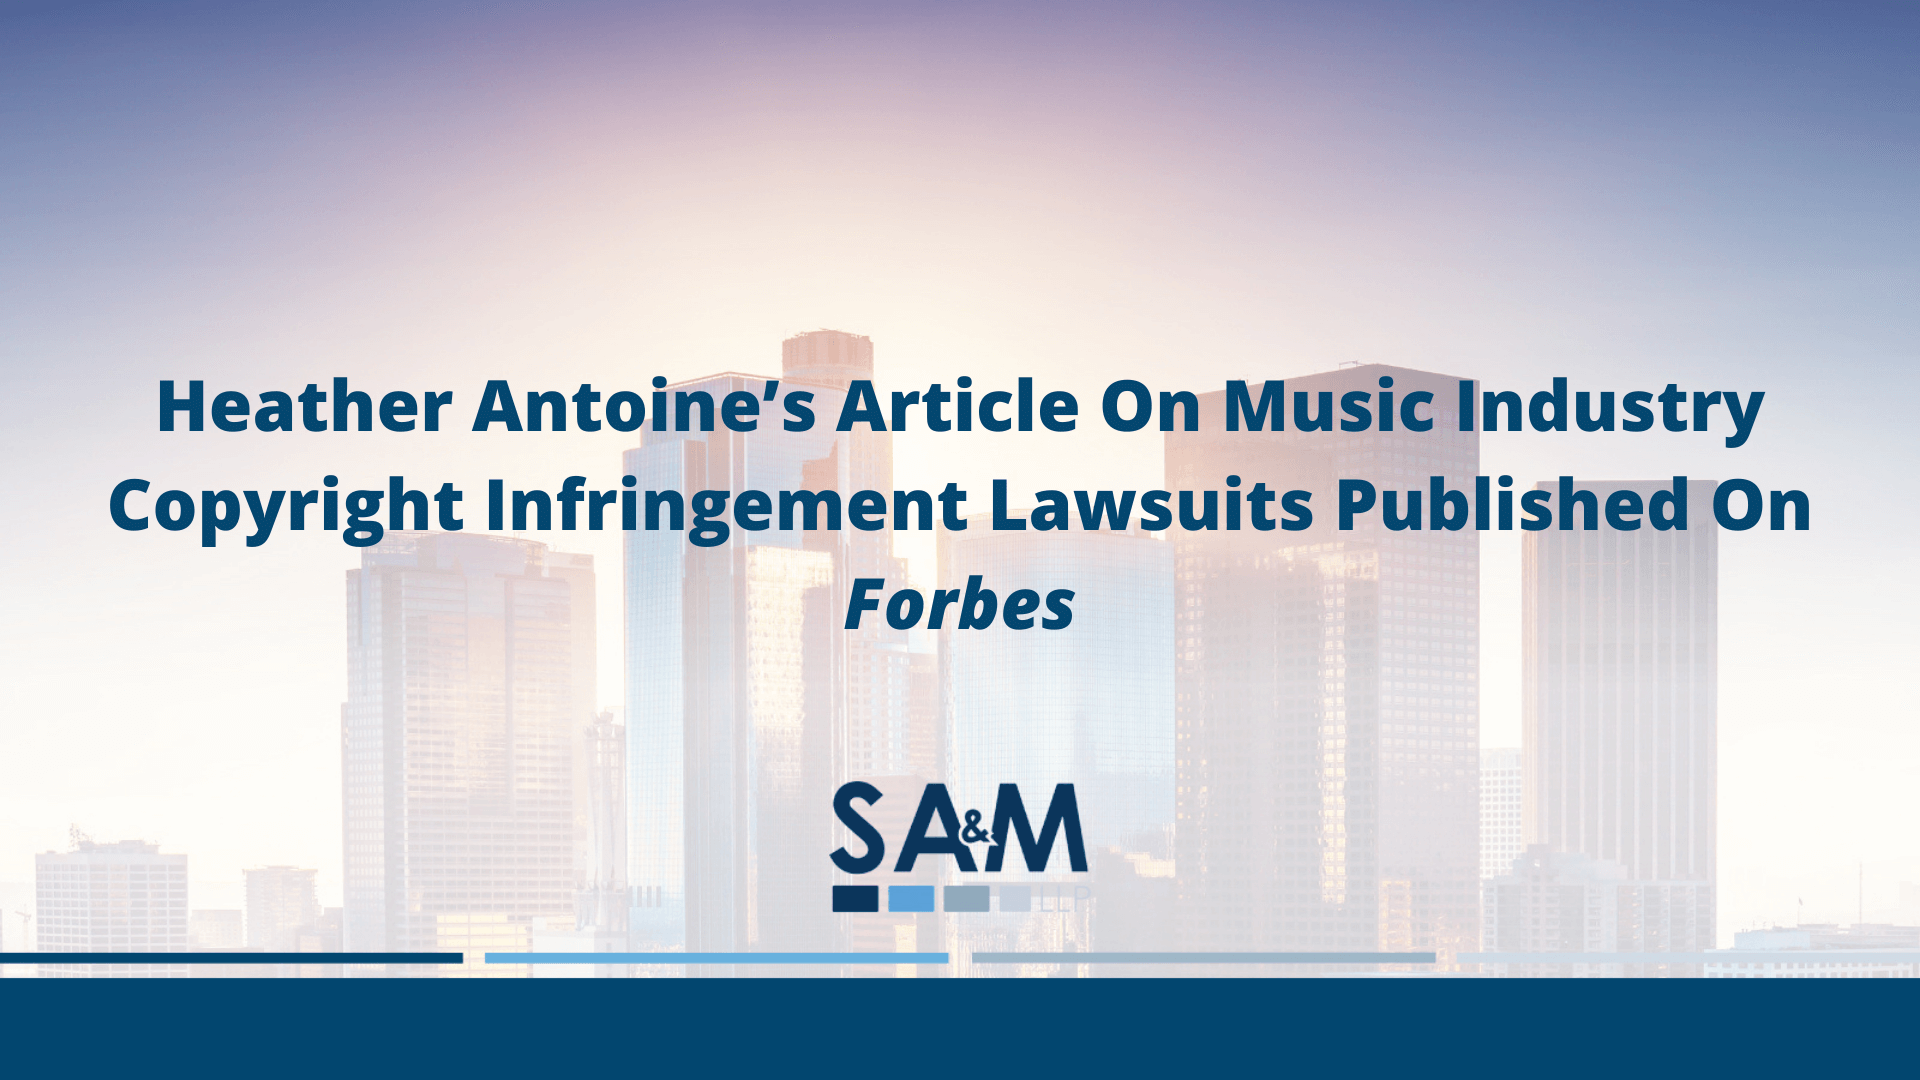 Heather Antoine’s Article on Music Industry Copyright Infringement Lawsuits Published on Forbes